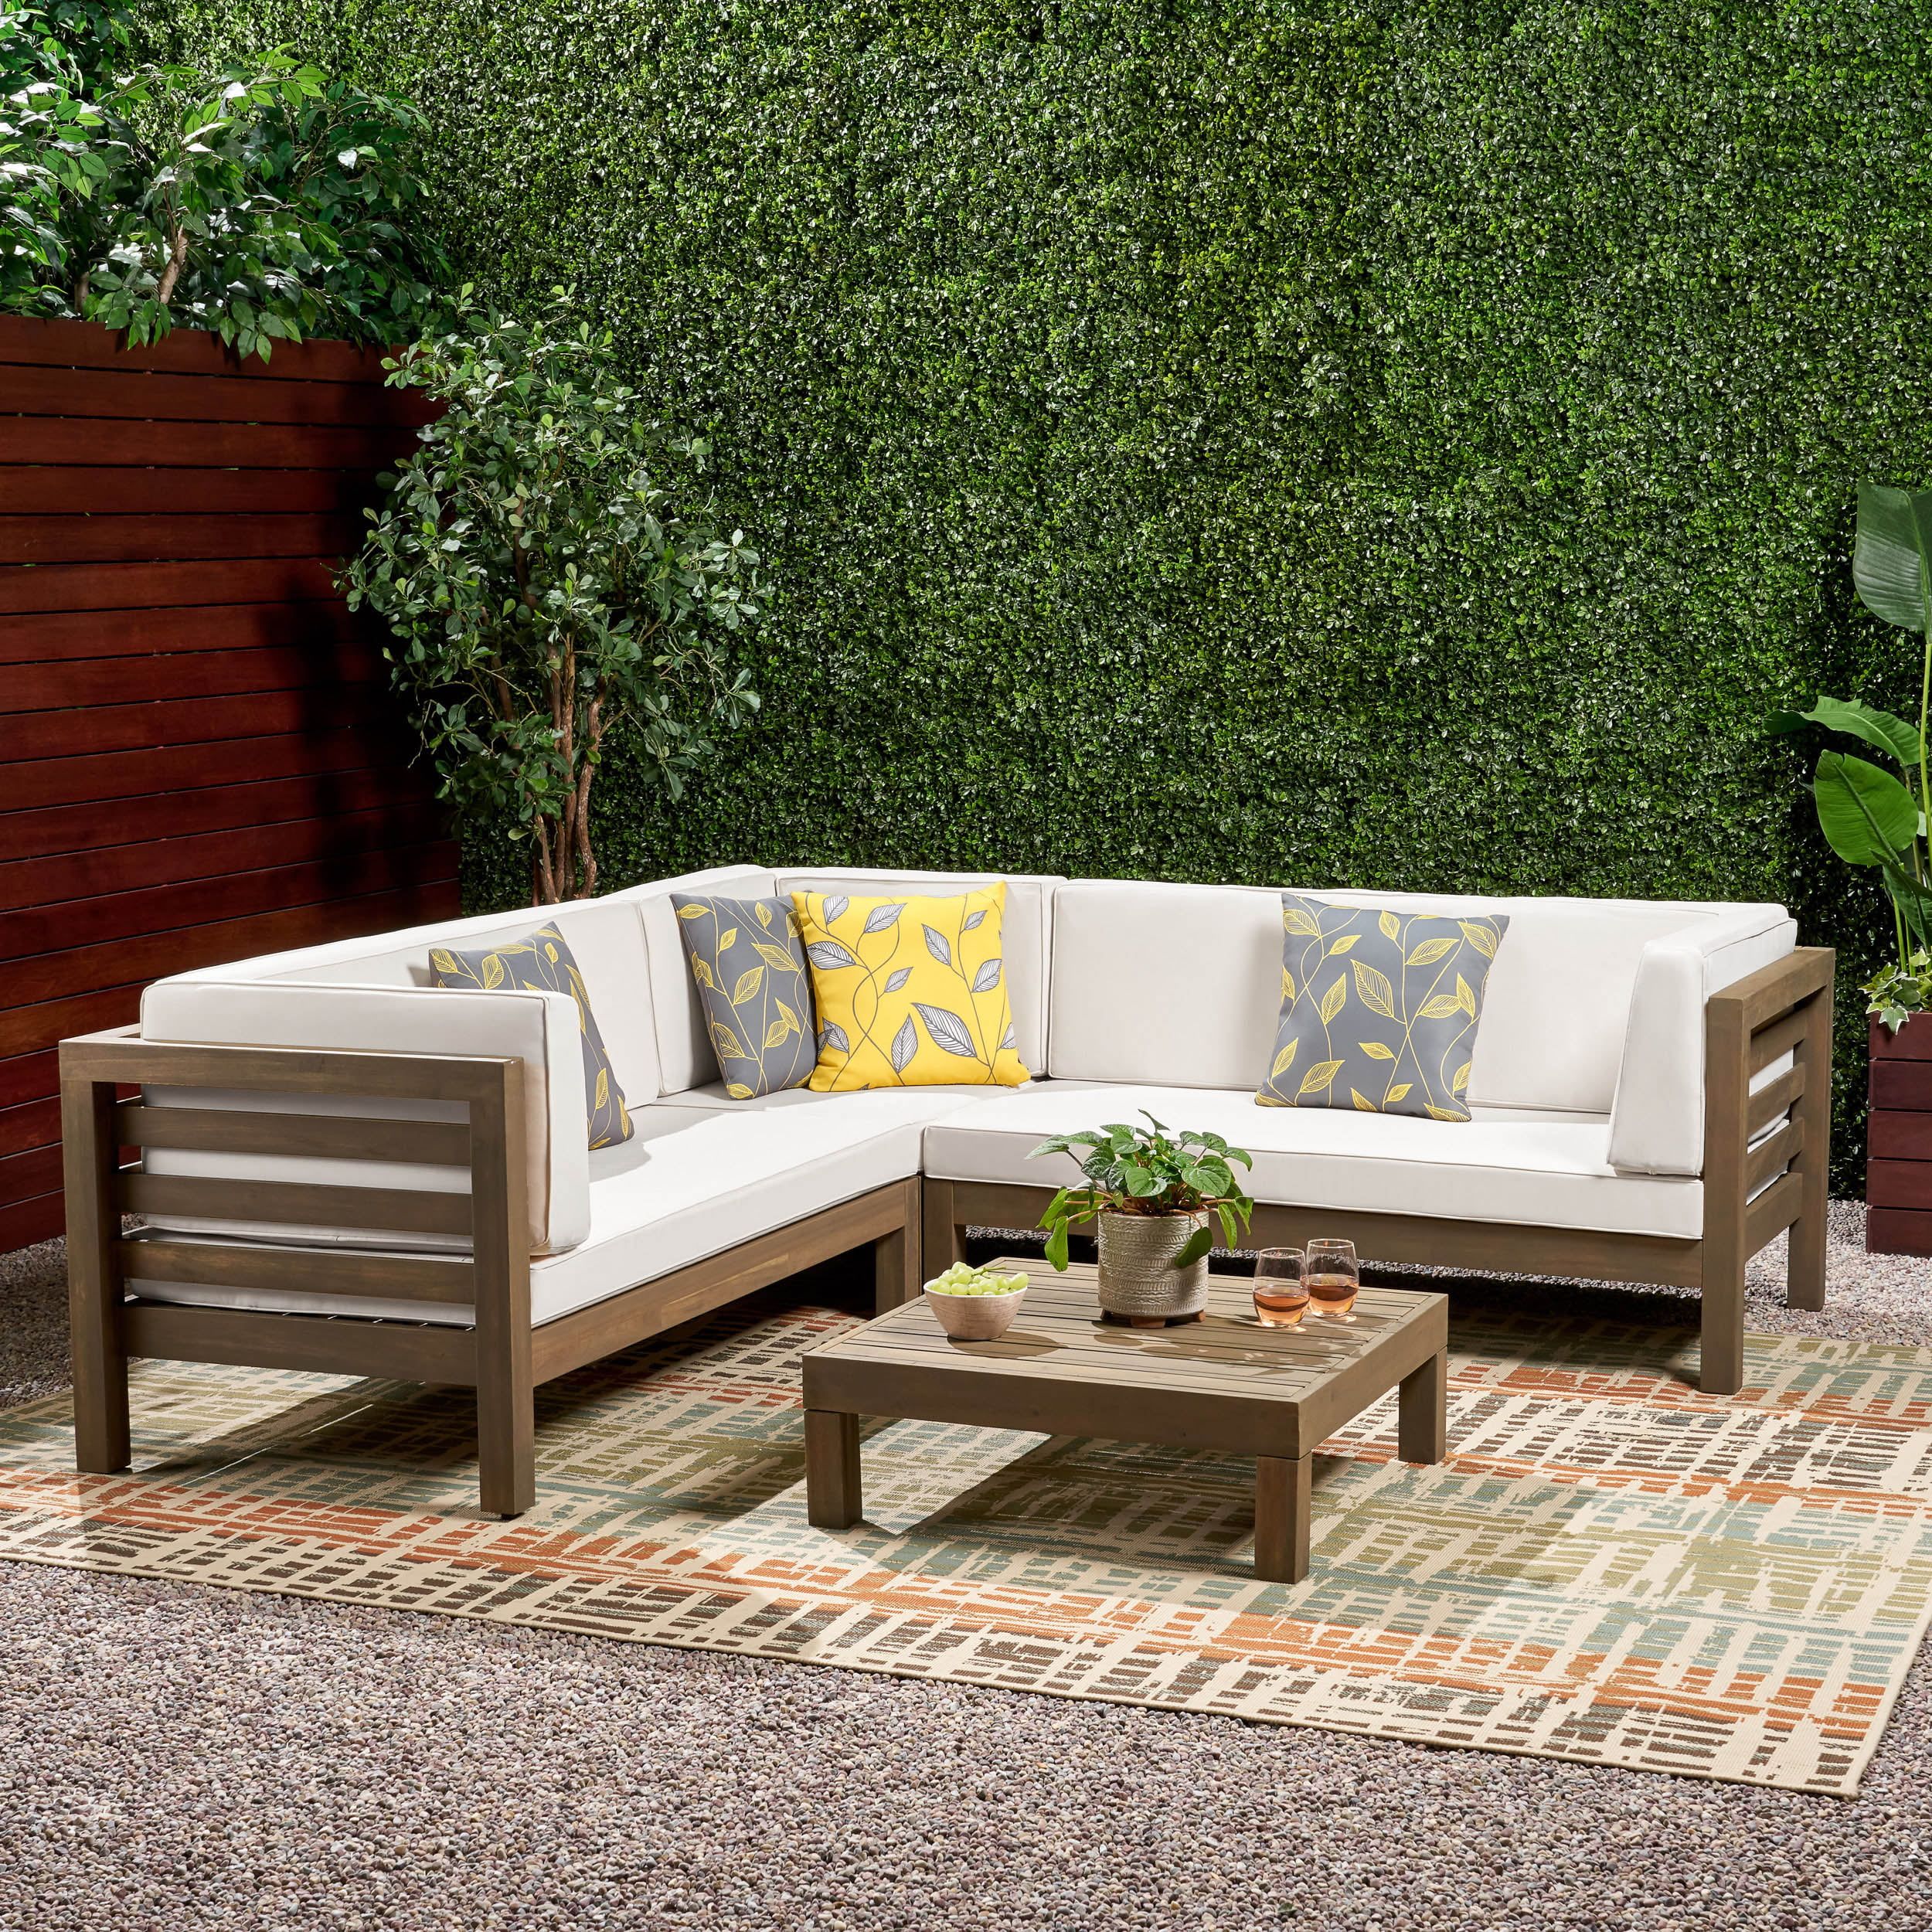 Argentine 4 Piece Outdoor Wooden Sectional Set with Cushions, Grey Finish, White | Walmart (US)